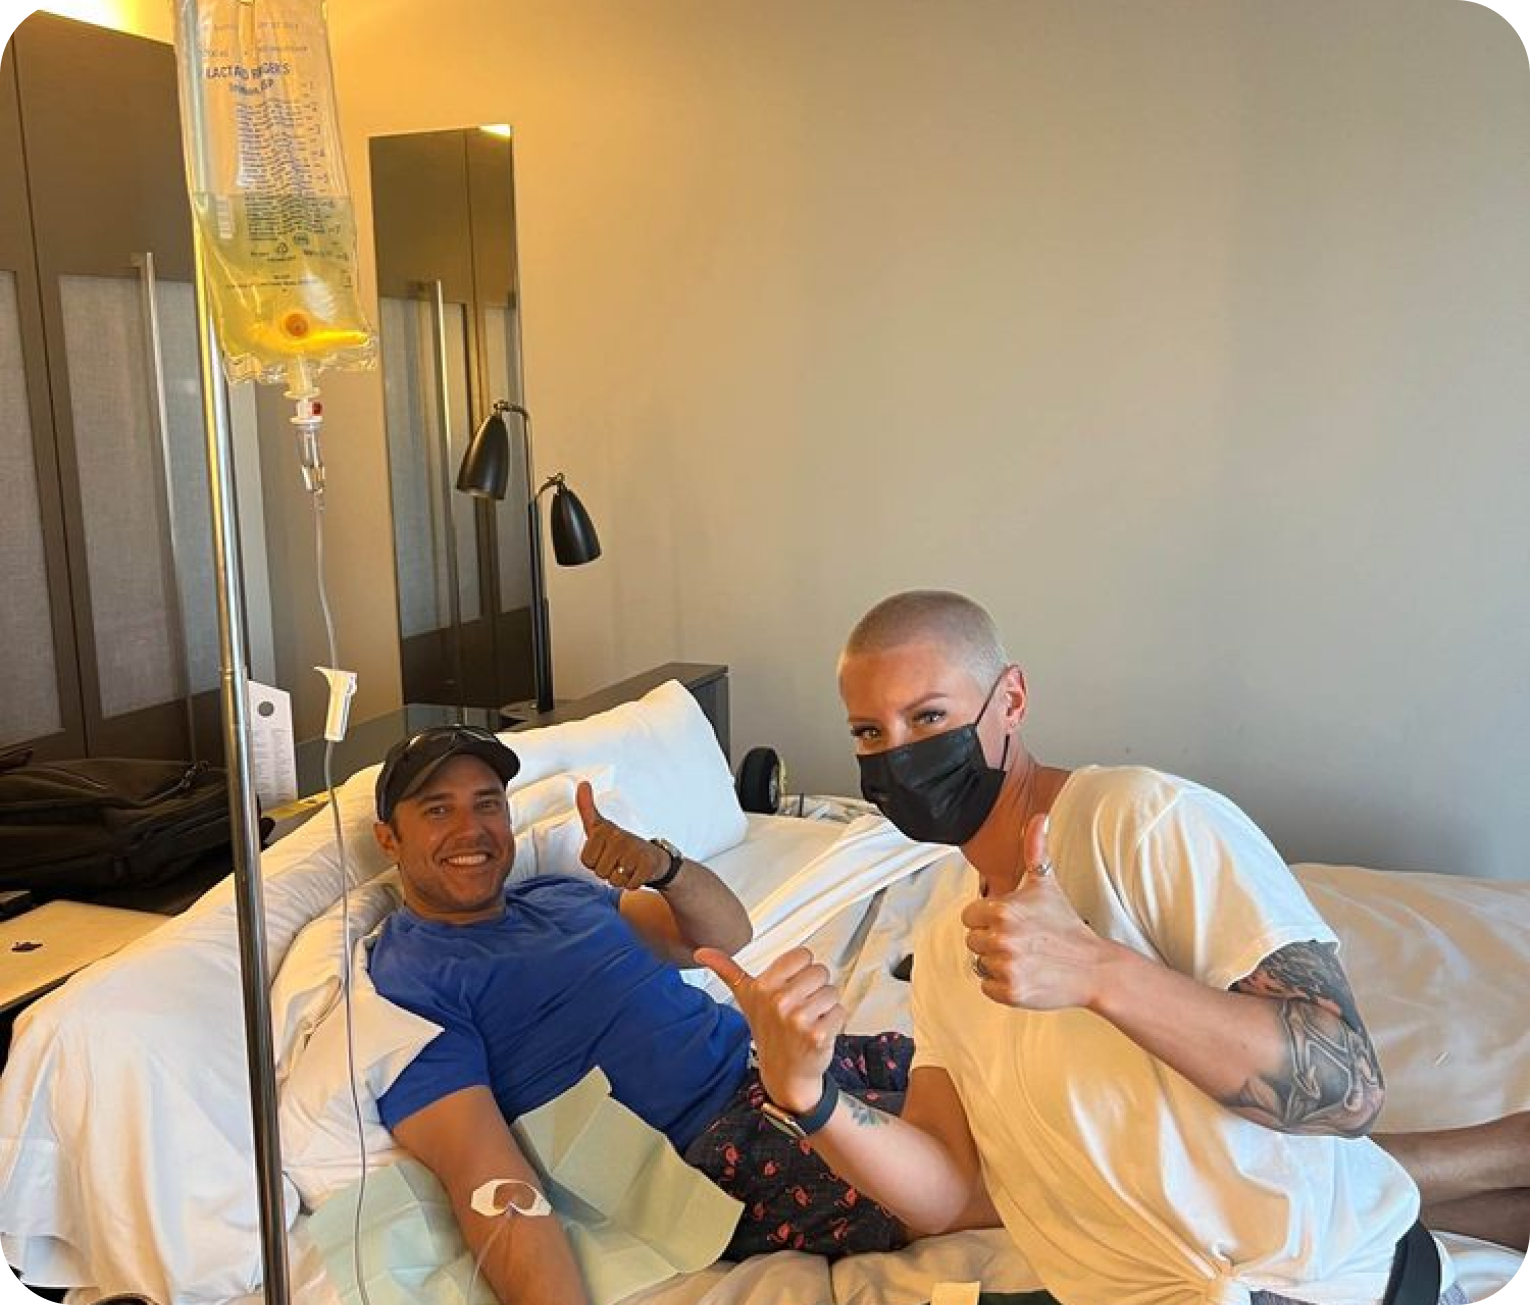 A man wearing a mask is giving a thumbs up next to another man in a hospital bed.